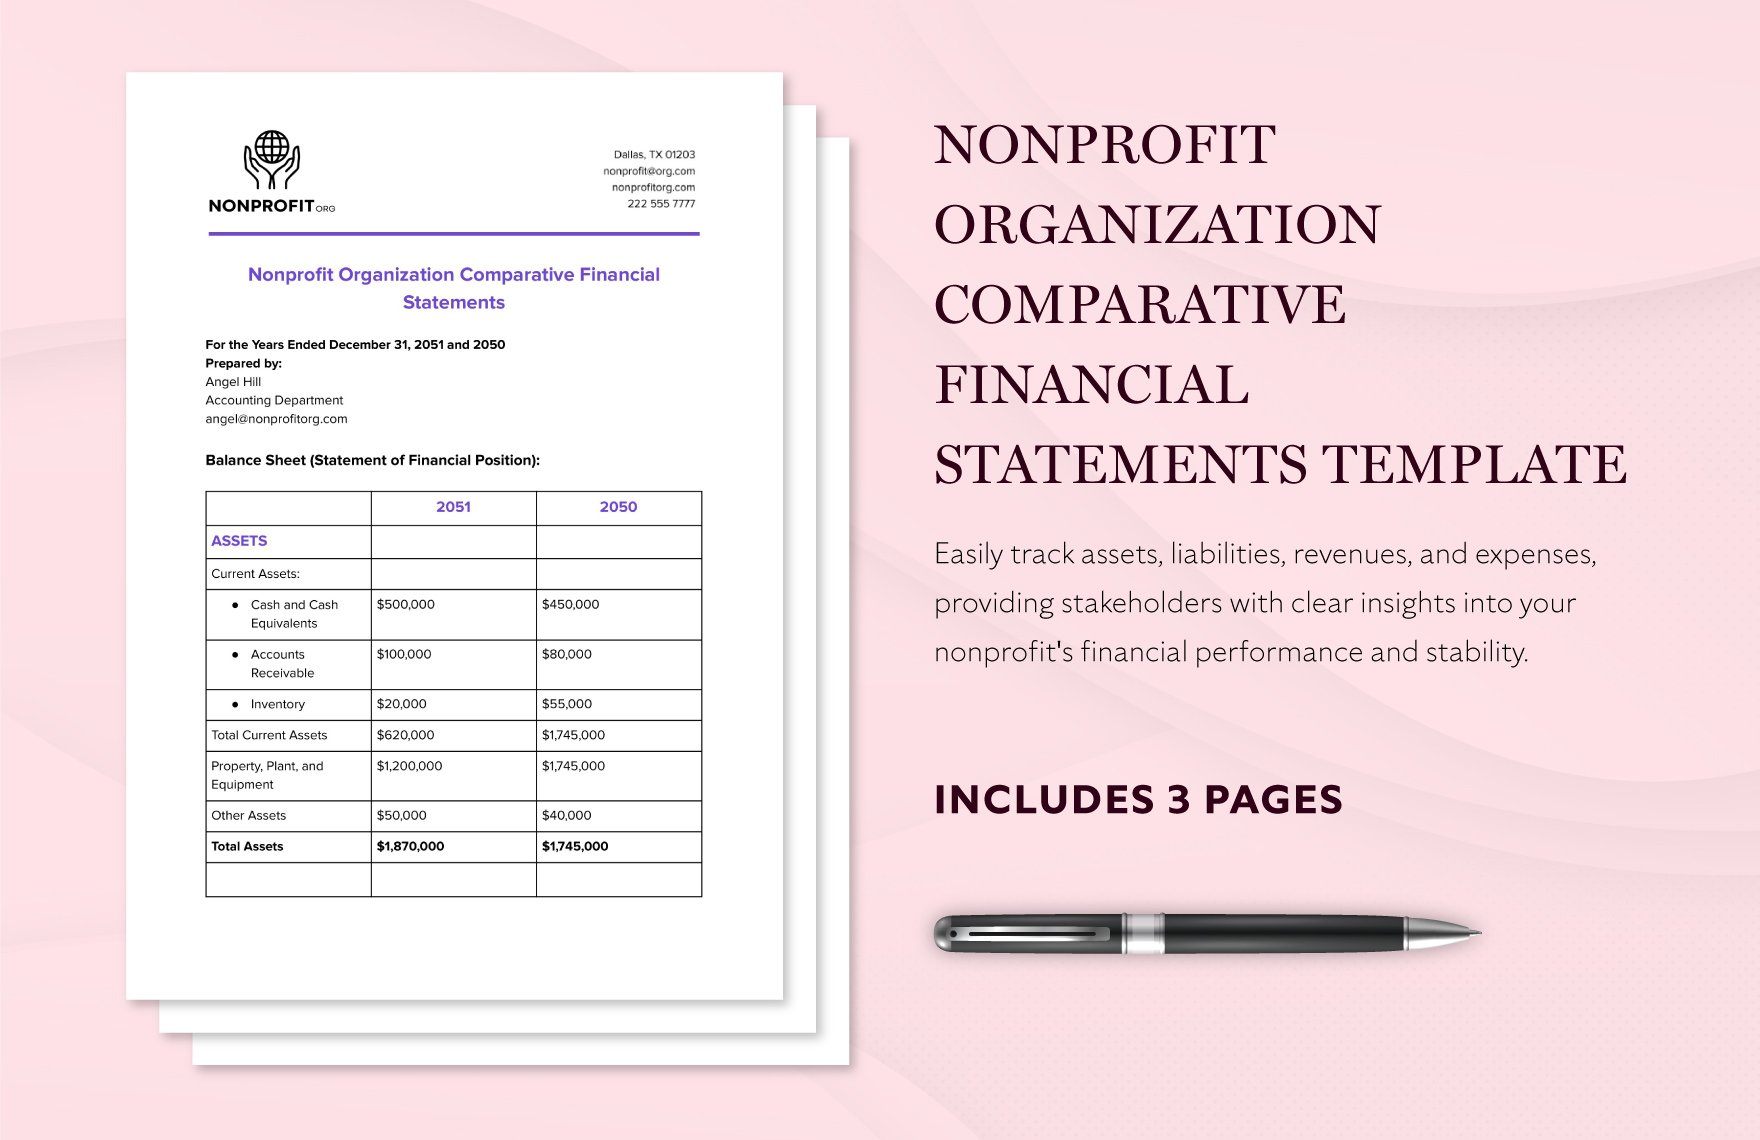 Nonprofit Organization Comparative Financial Statements Template in Word, Google Docs, PDF